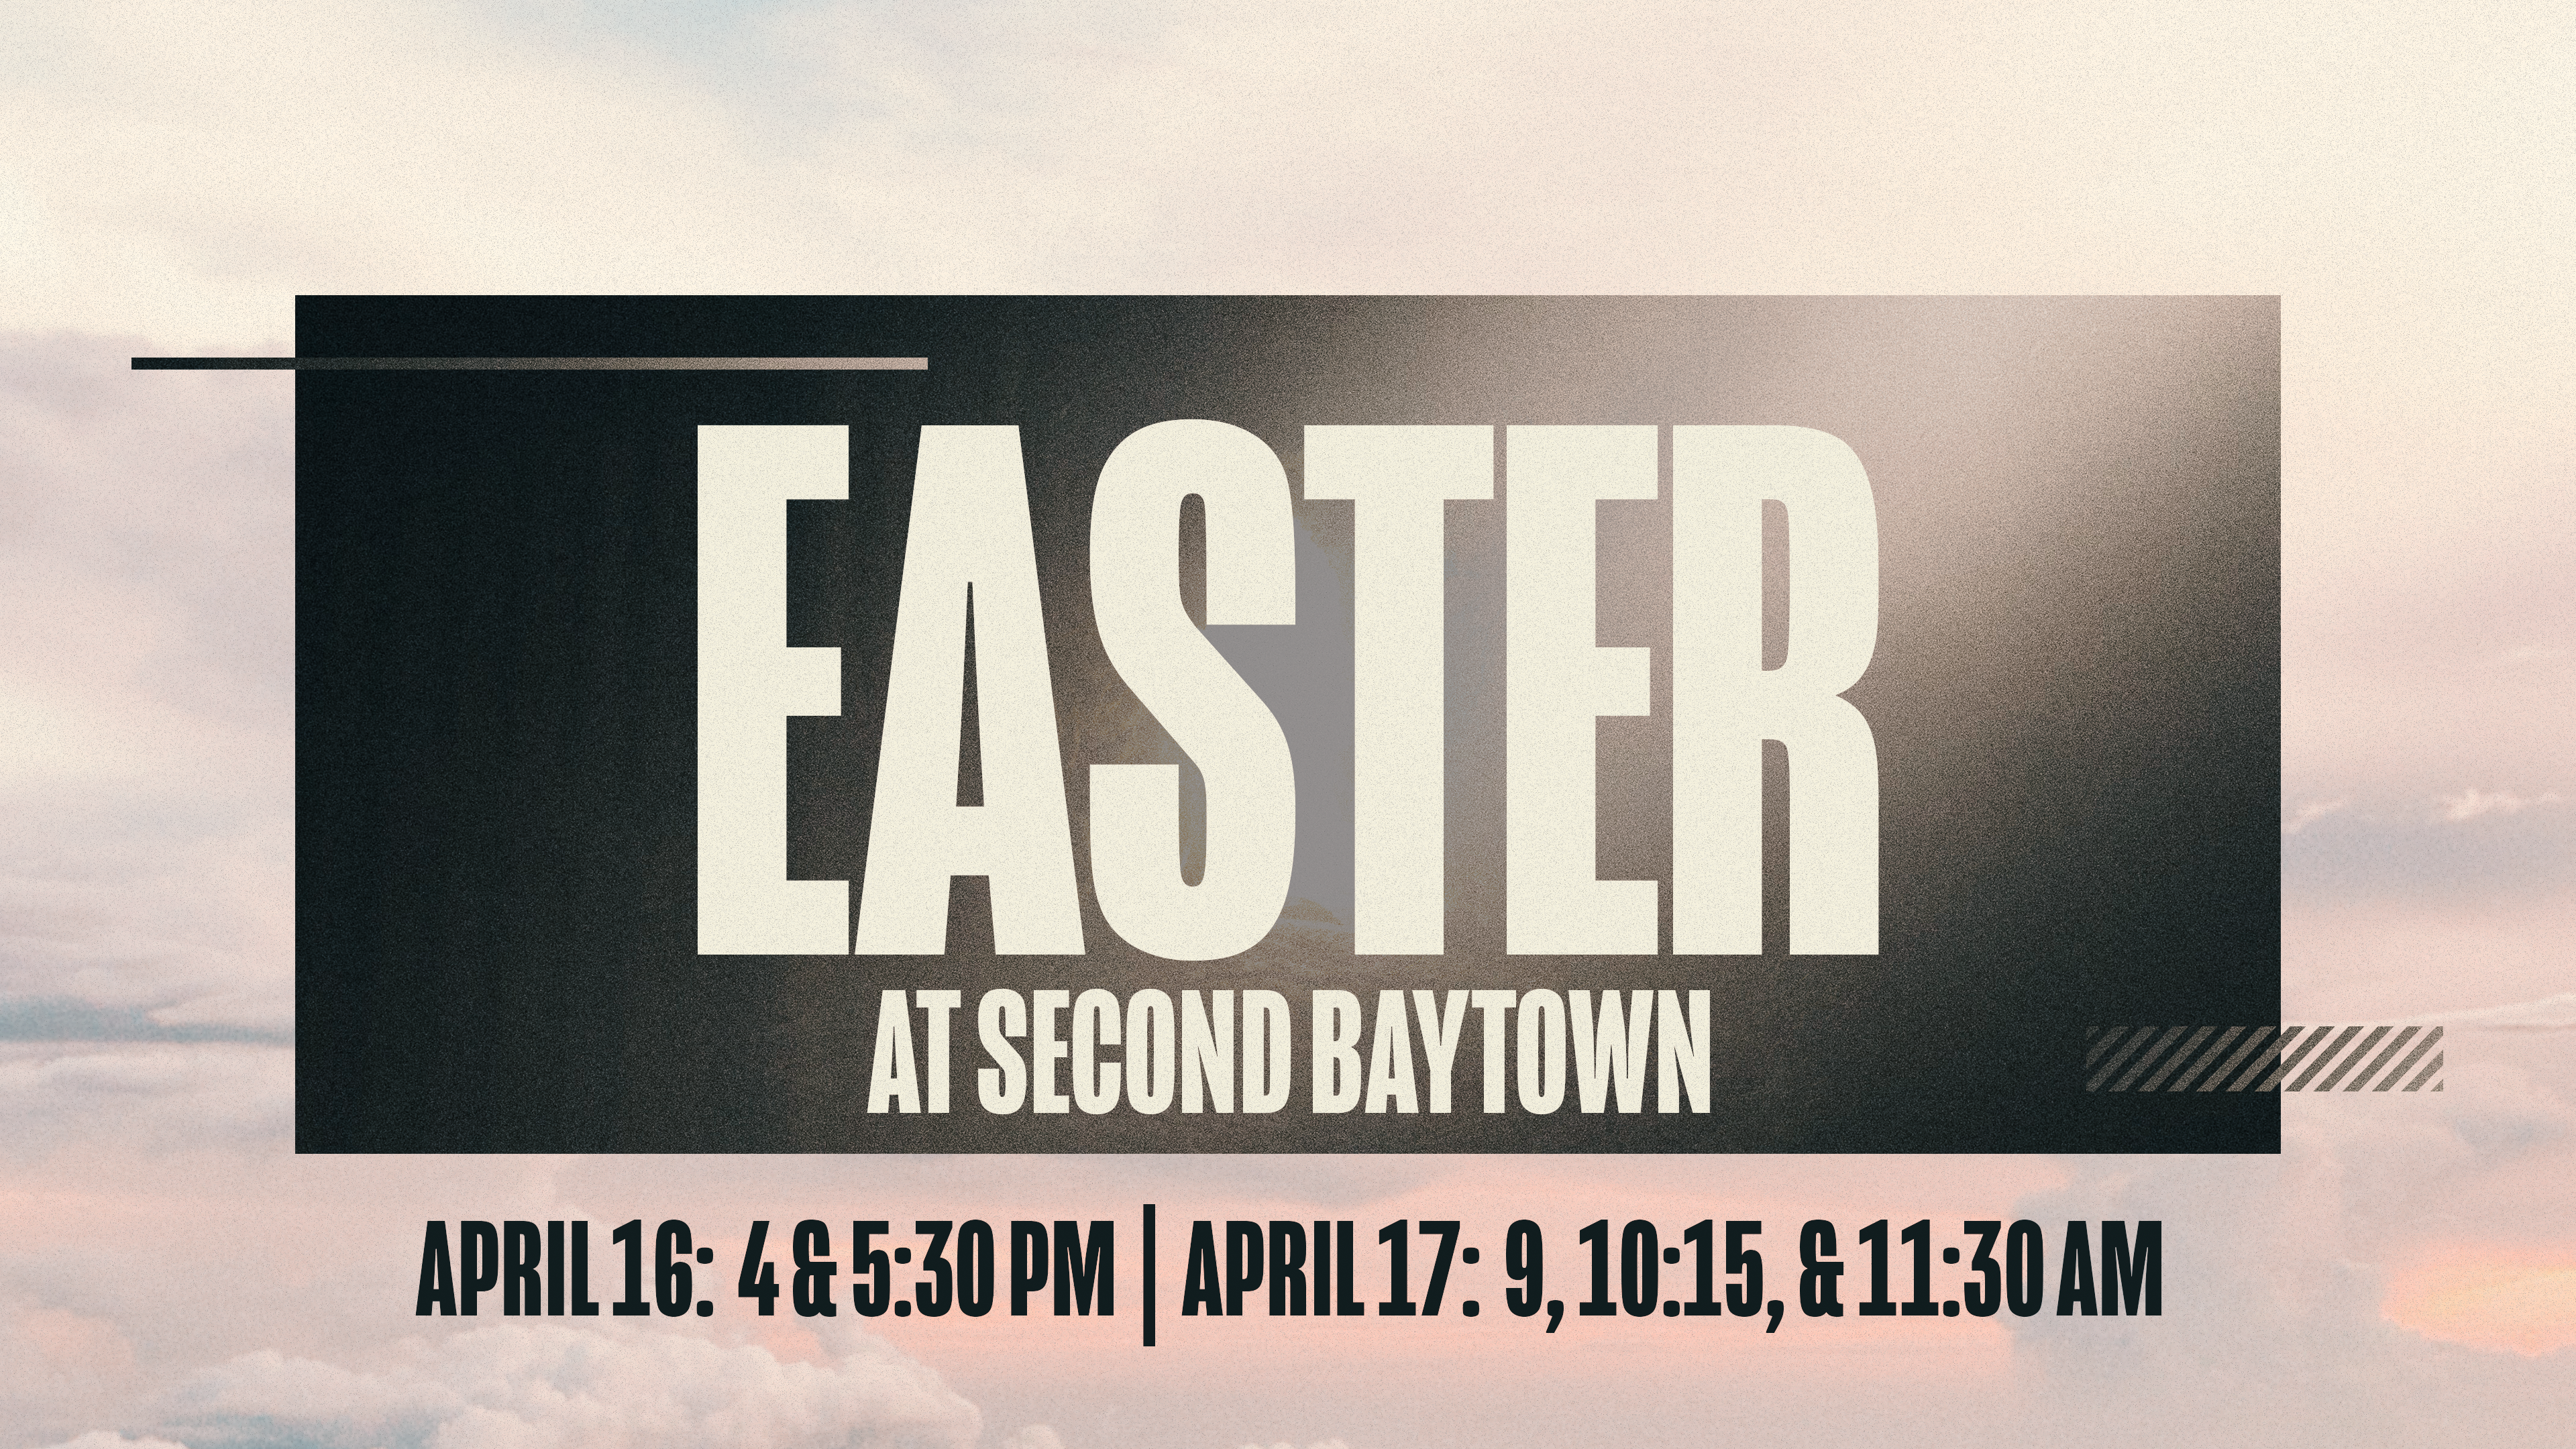 Easter at Second Baytown